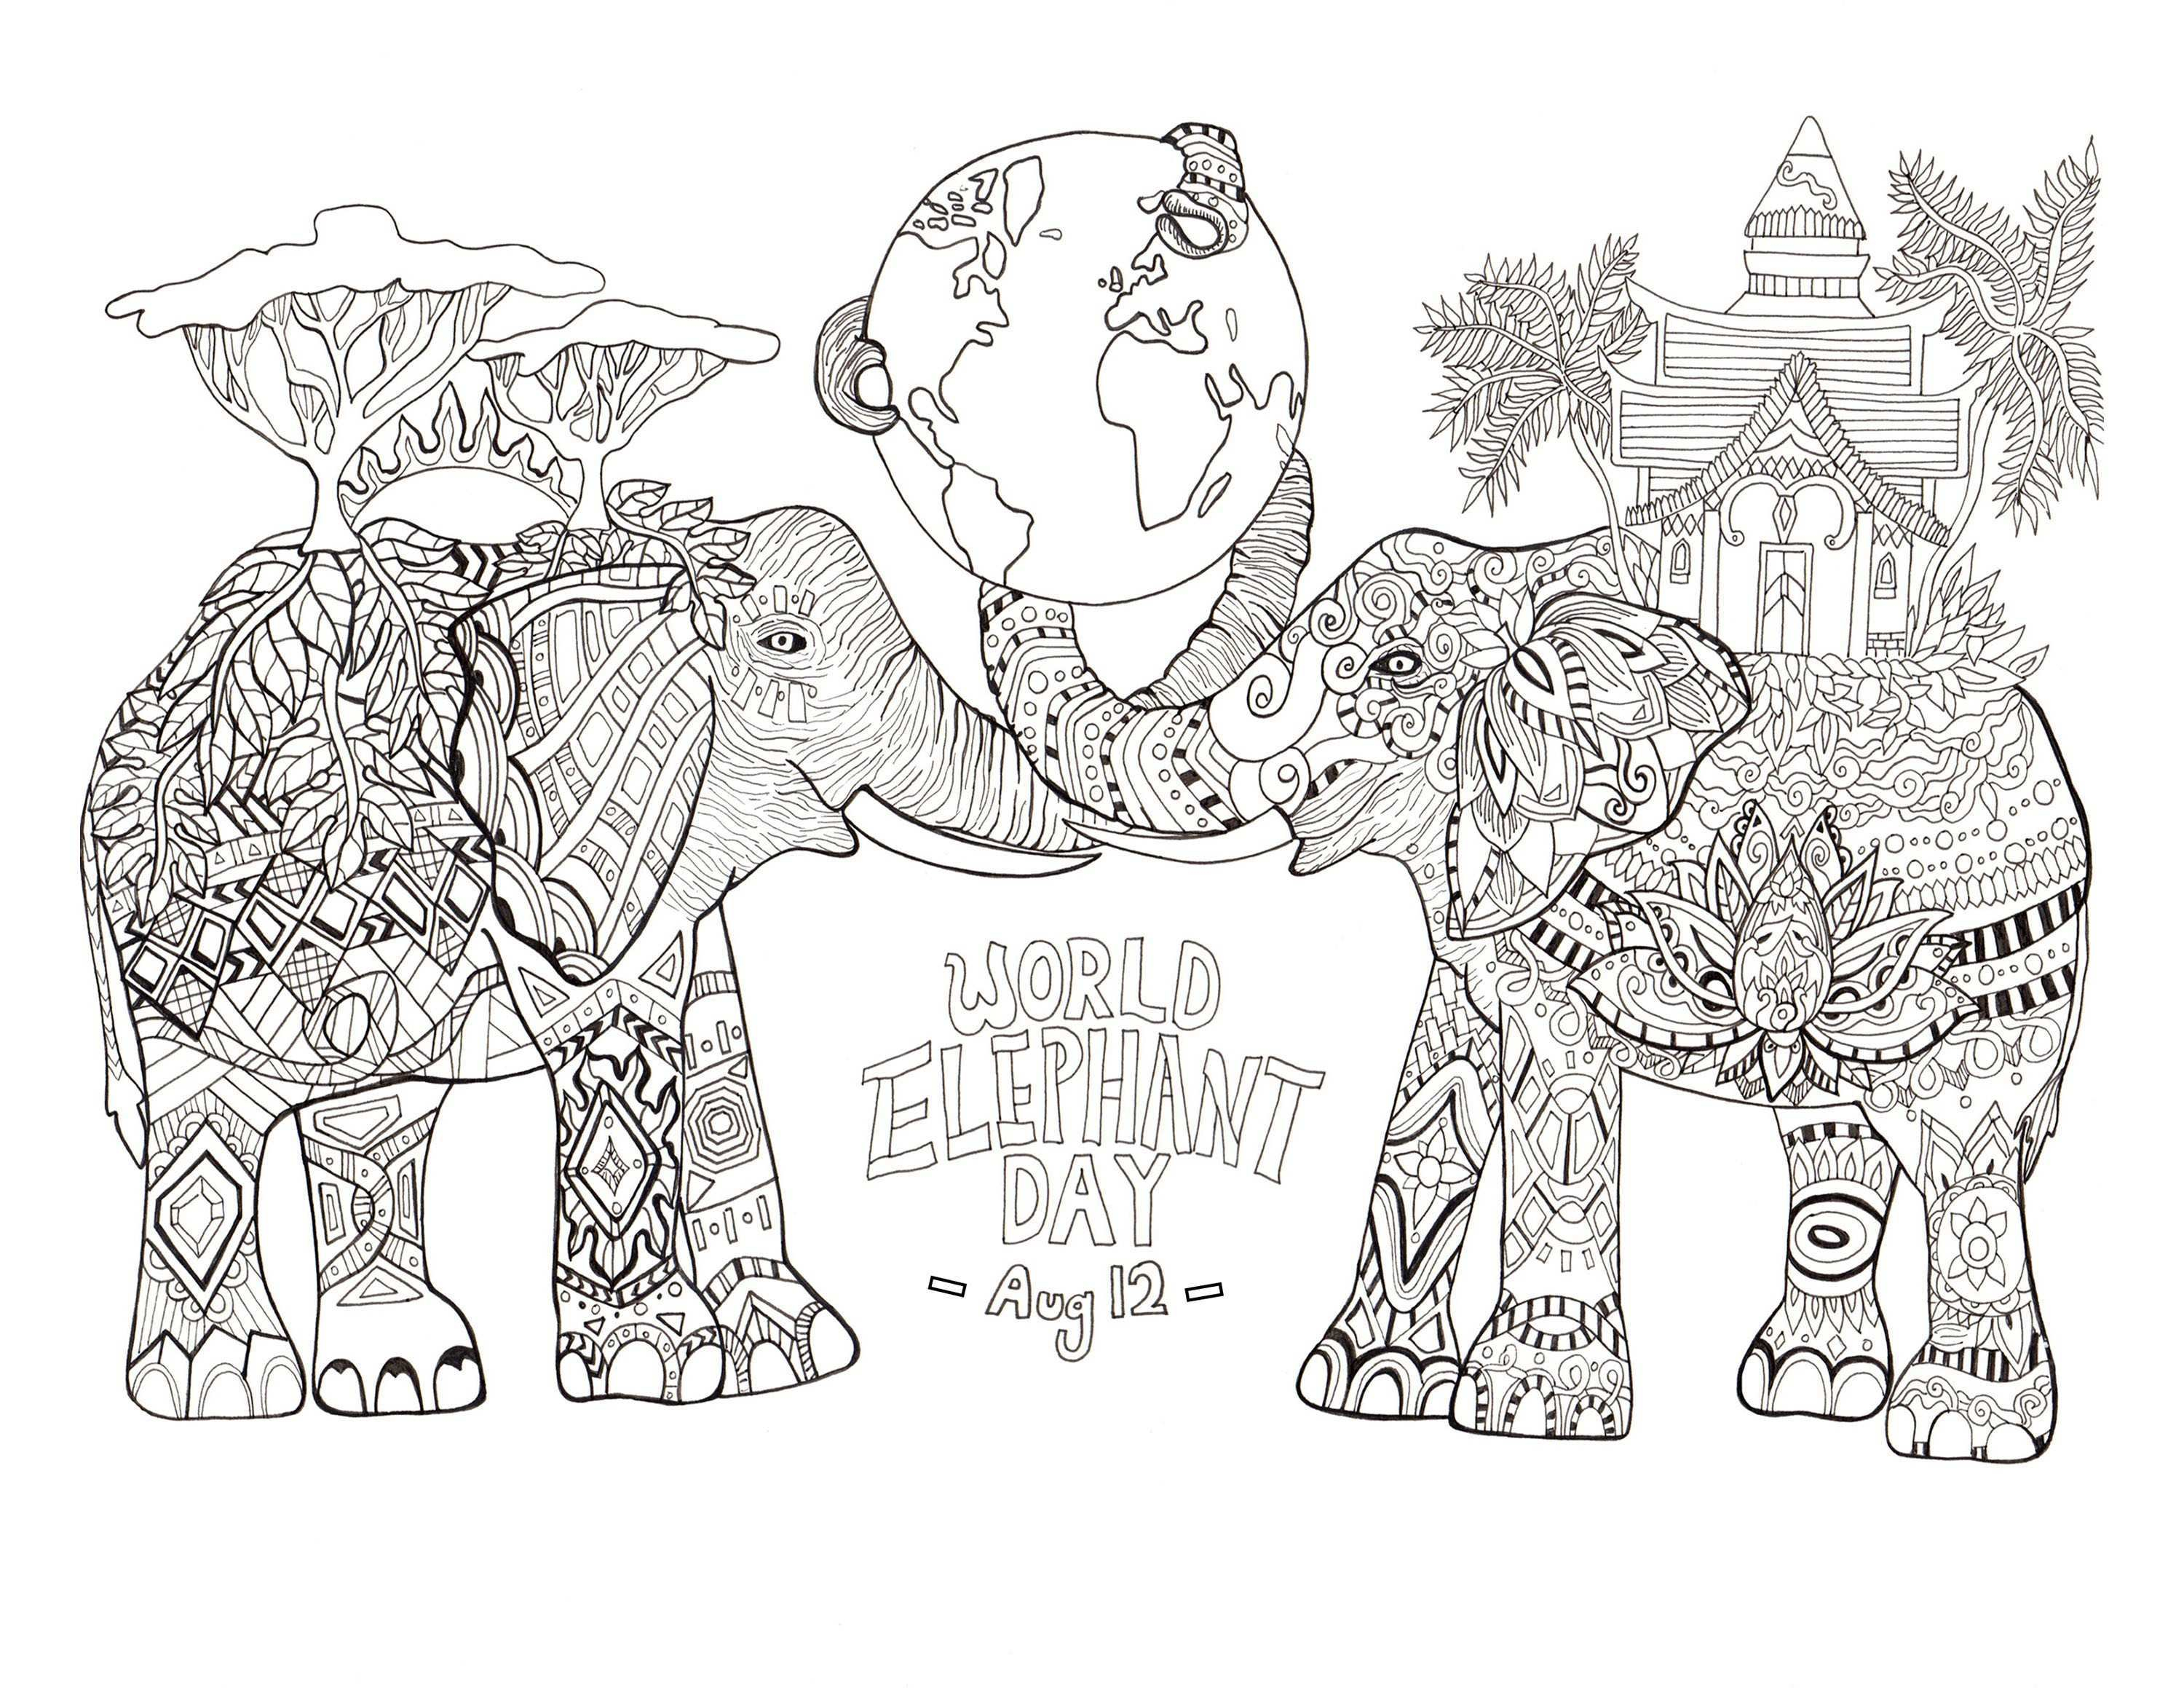 Voltron Coloring Pages Free Voltron Coloring Pages Luxury World Elephant Day Elephants Coloring